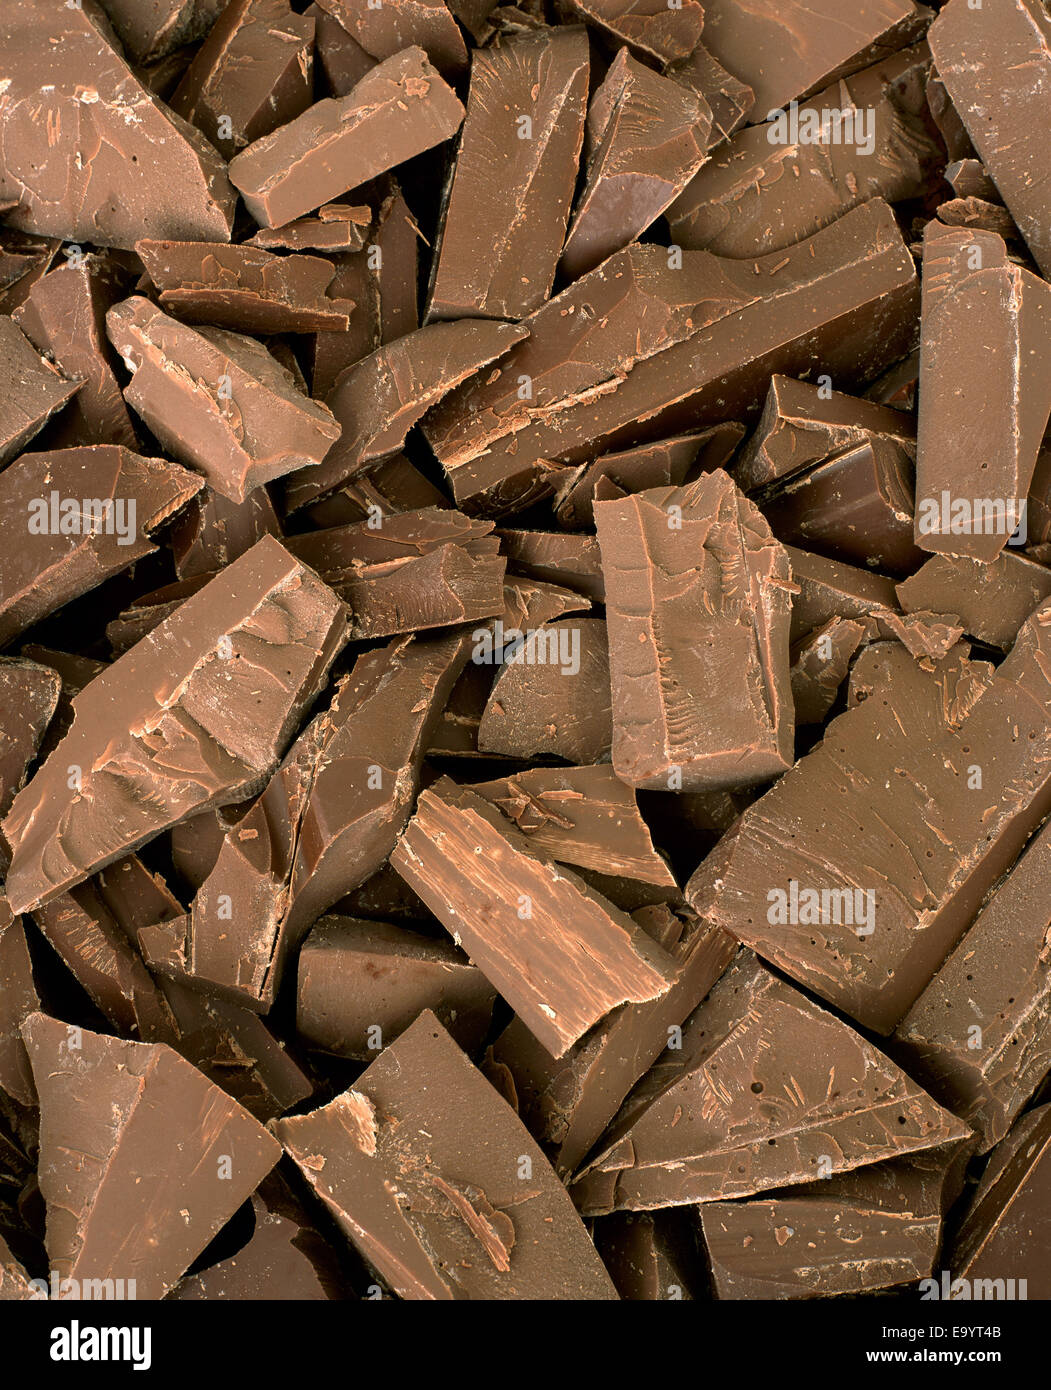 pile of pieces of chocolate Stock Photo